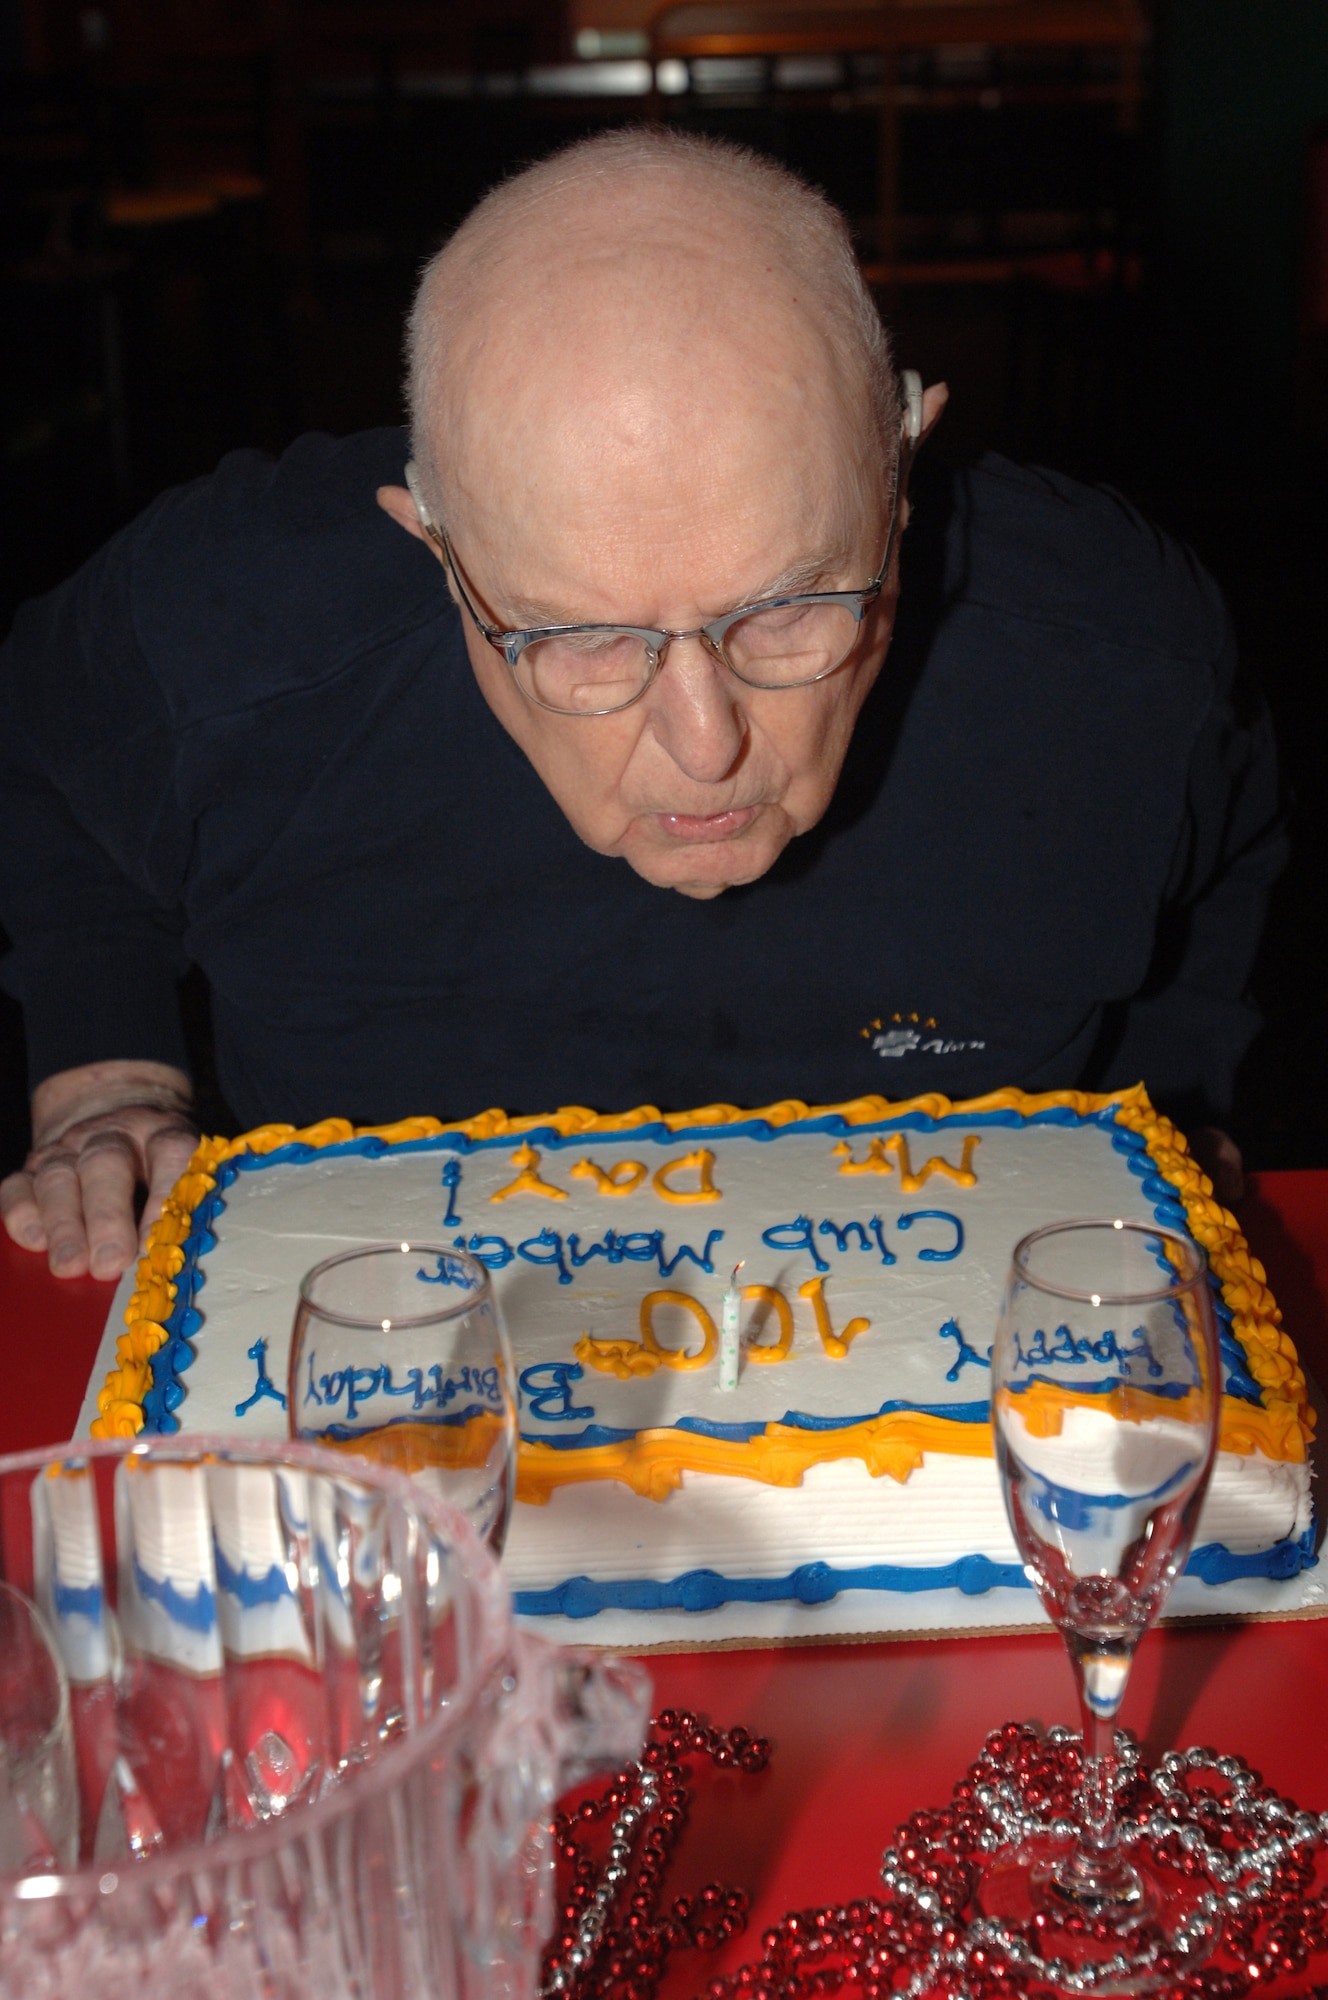 Retired Navy Lt. Cmdr. Richmond Day blows out the candle on his birthday cake during a celebration of his 100th birthday at Grand Forks Air Force Base Sep. 4. The retired Navy officer, who served the country for 20 years, starting at Pearl Harbor in 1943, was surrounded by friends and family as well as Airmen from the base for the celebration. (U.S. Air Force photo/Tech. Sgt. Joseph Kapinos)